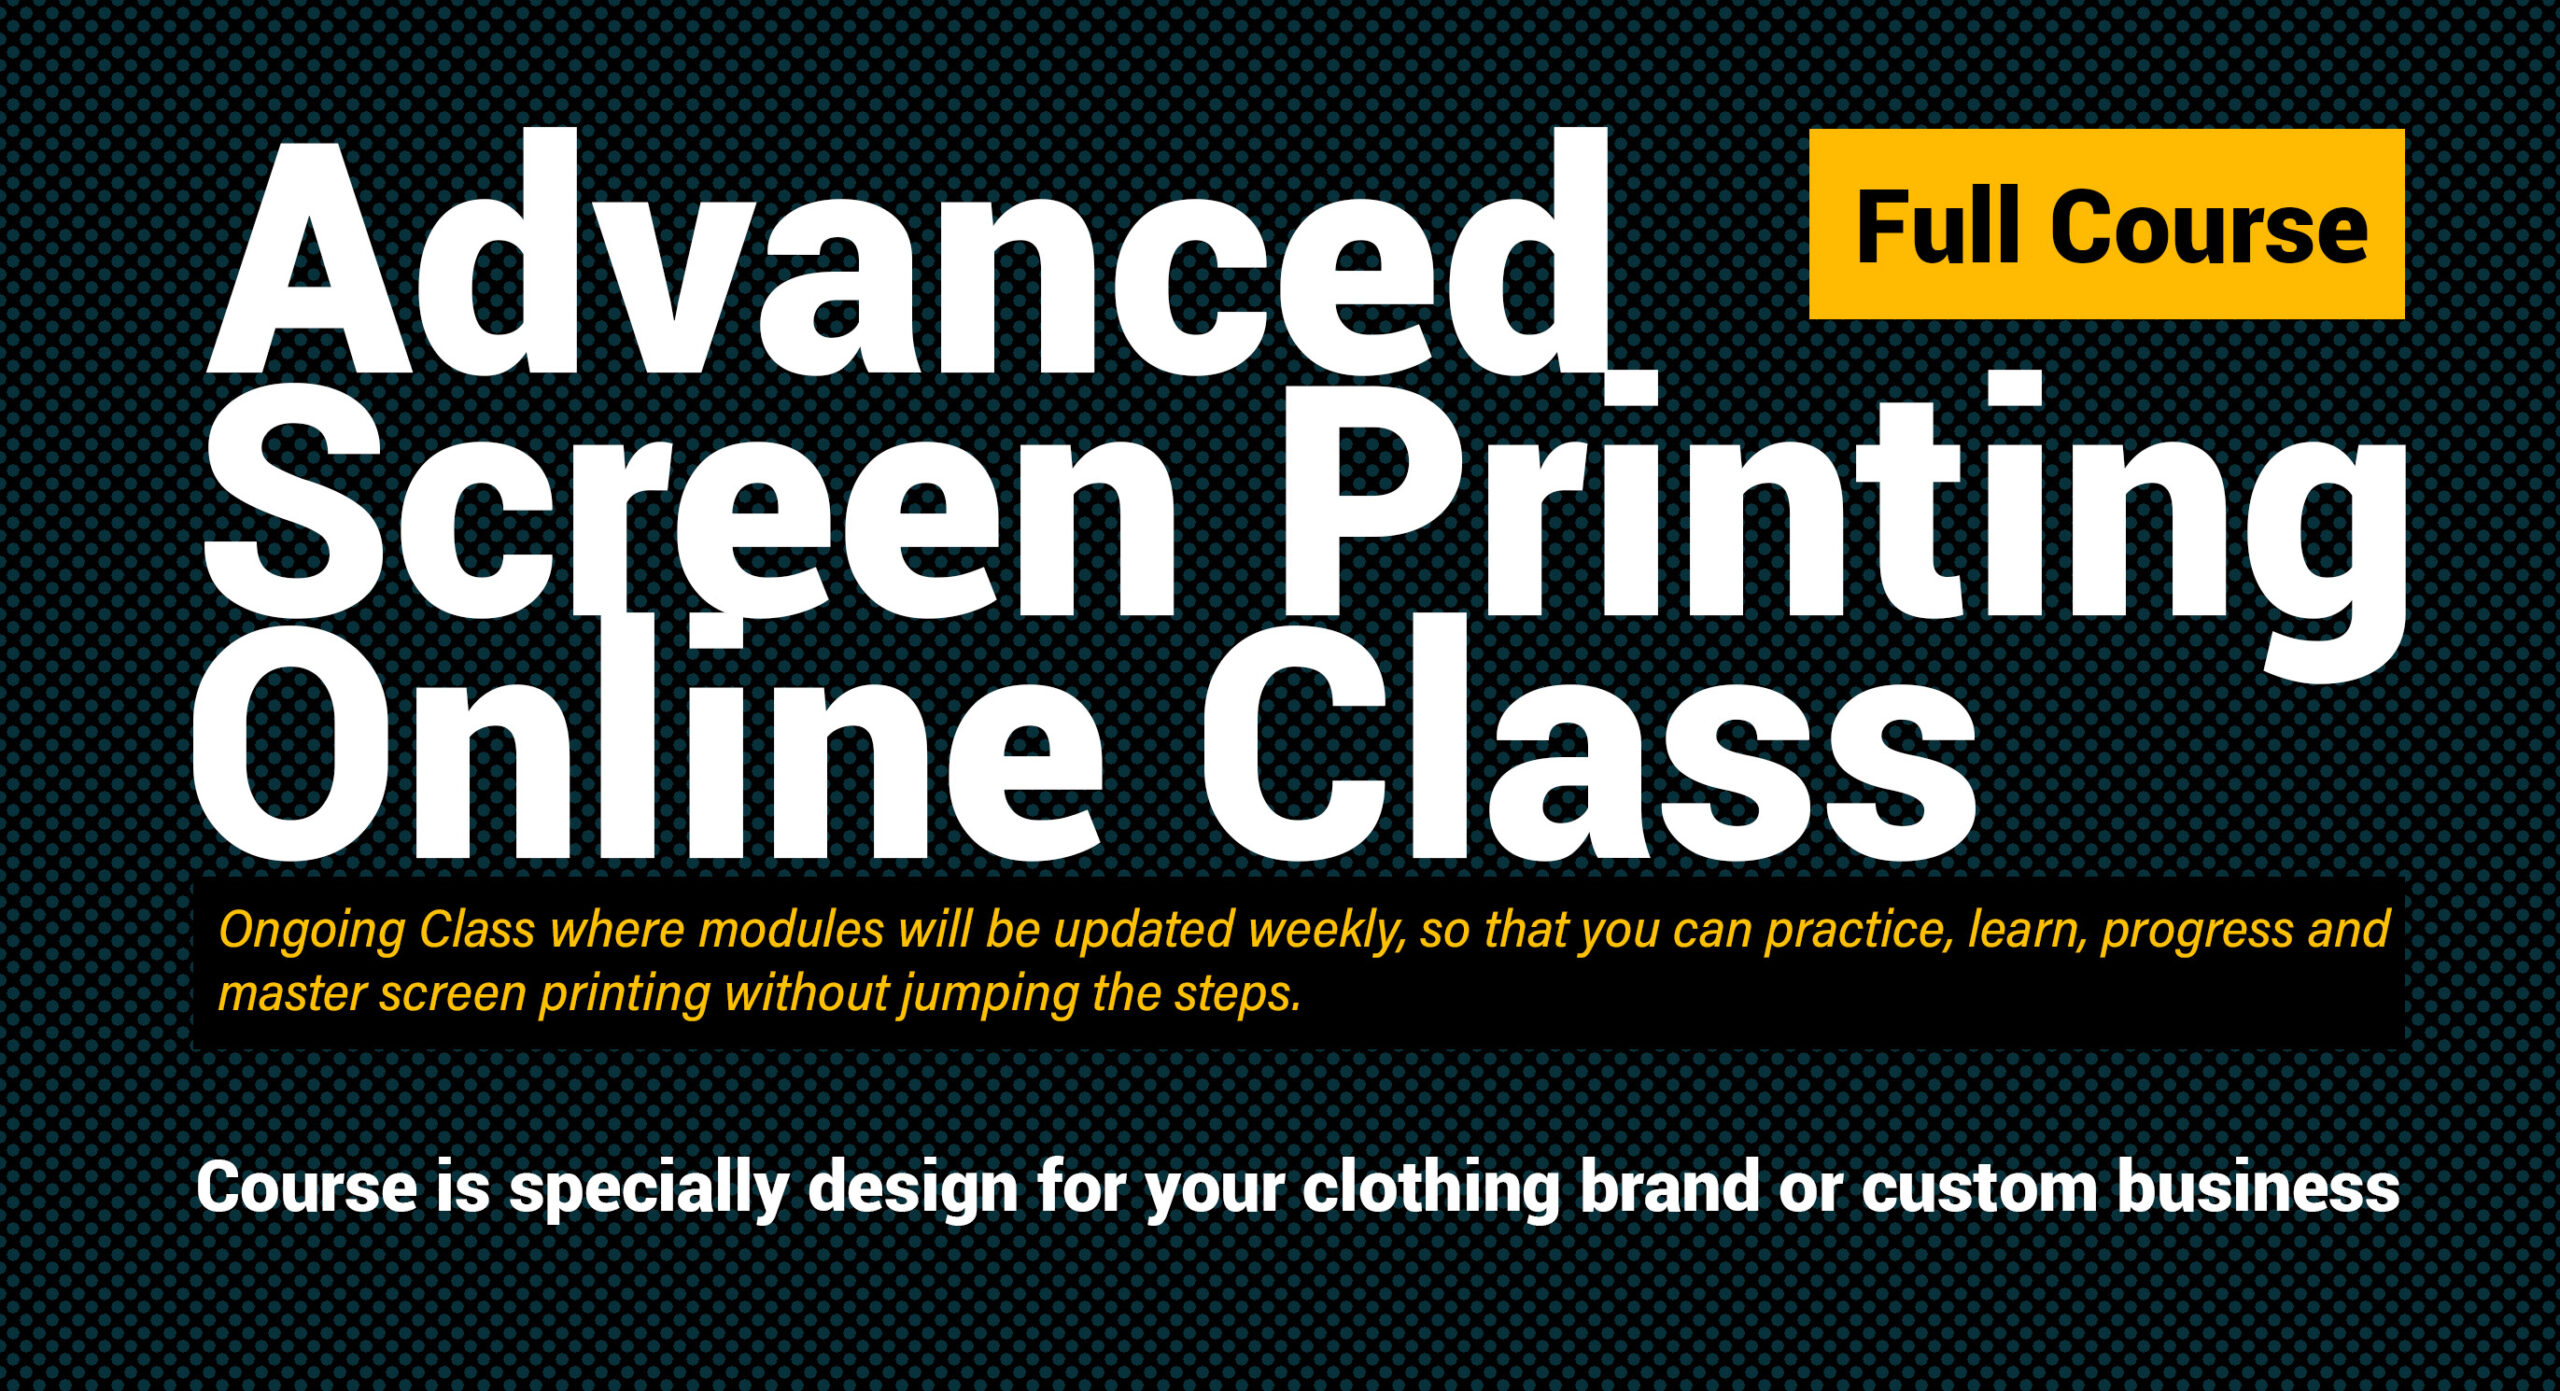 Advanced Screen Printing Course